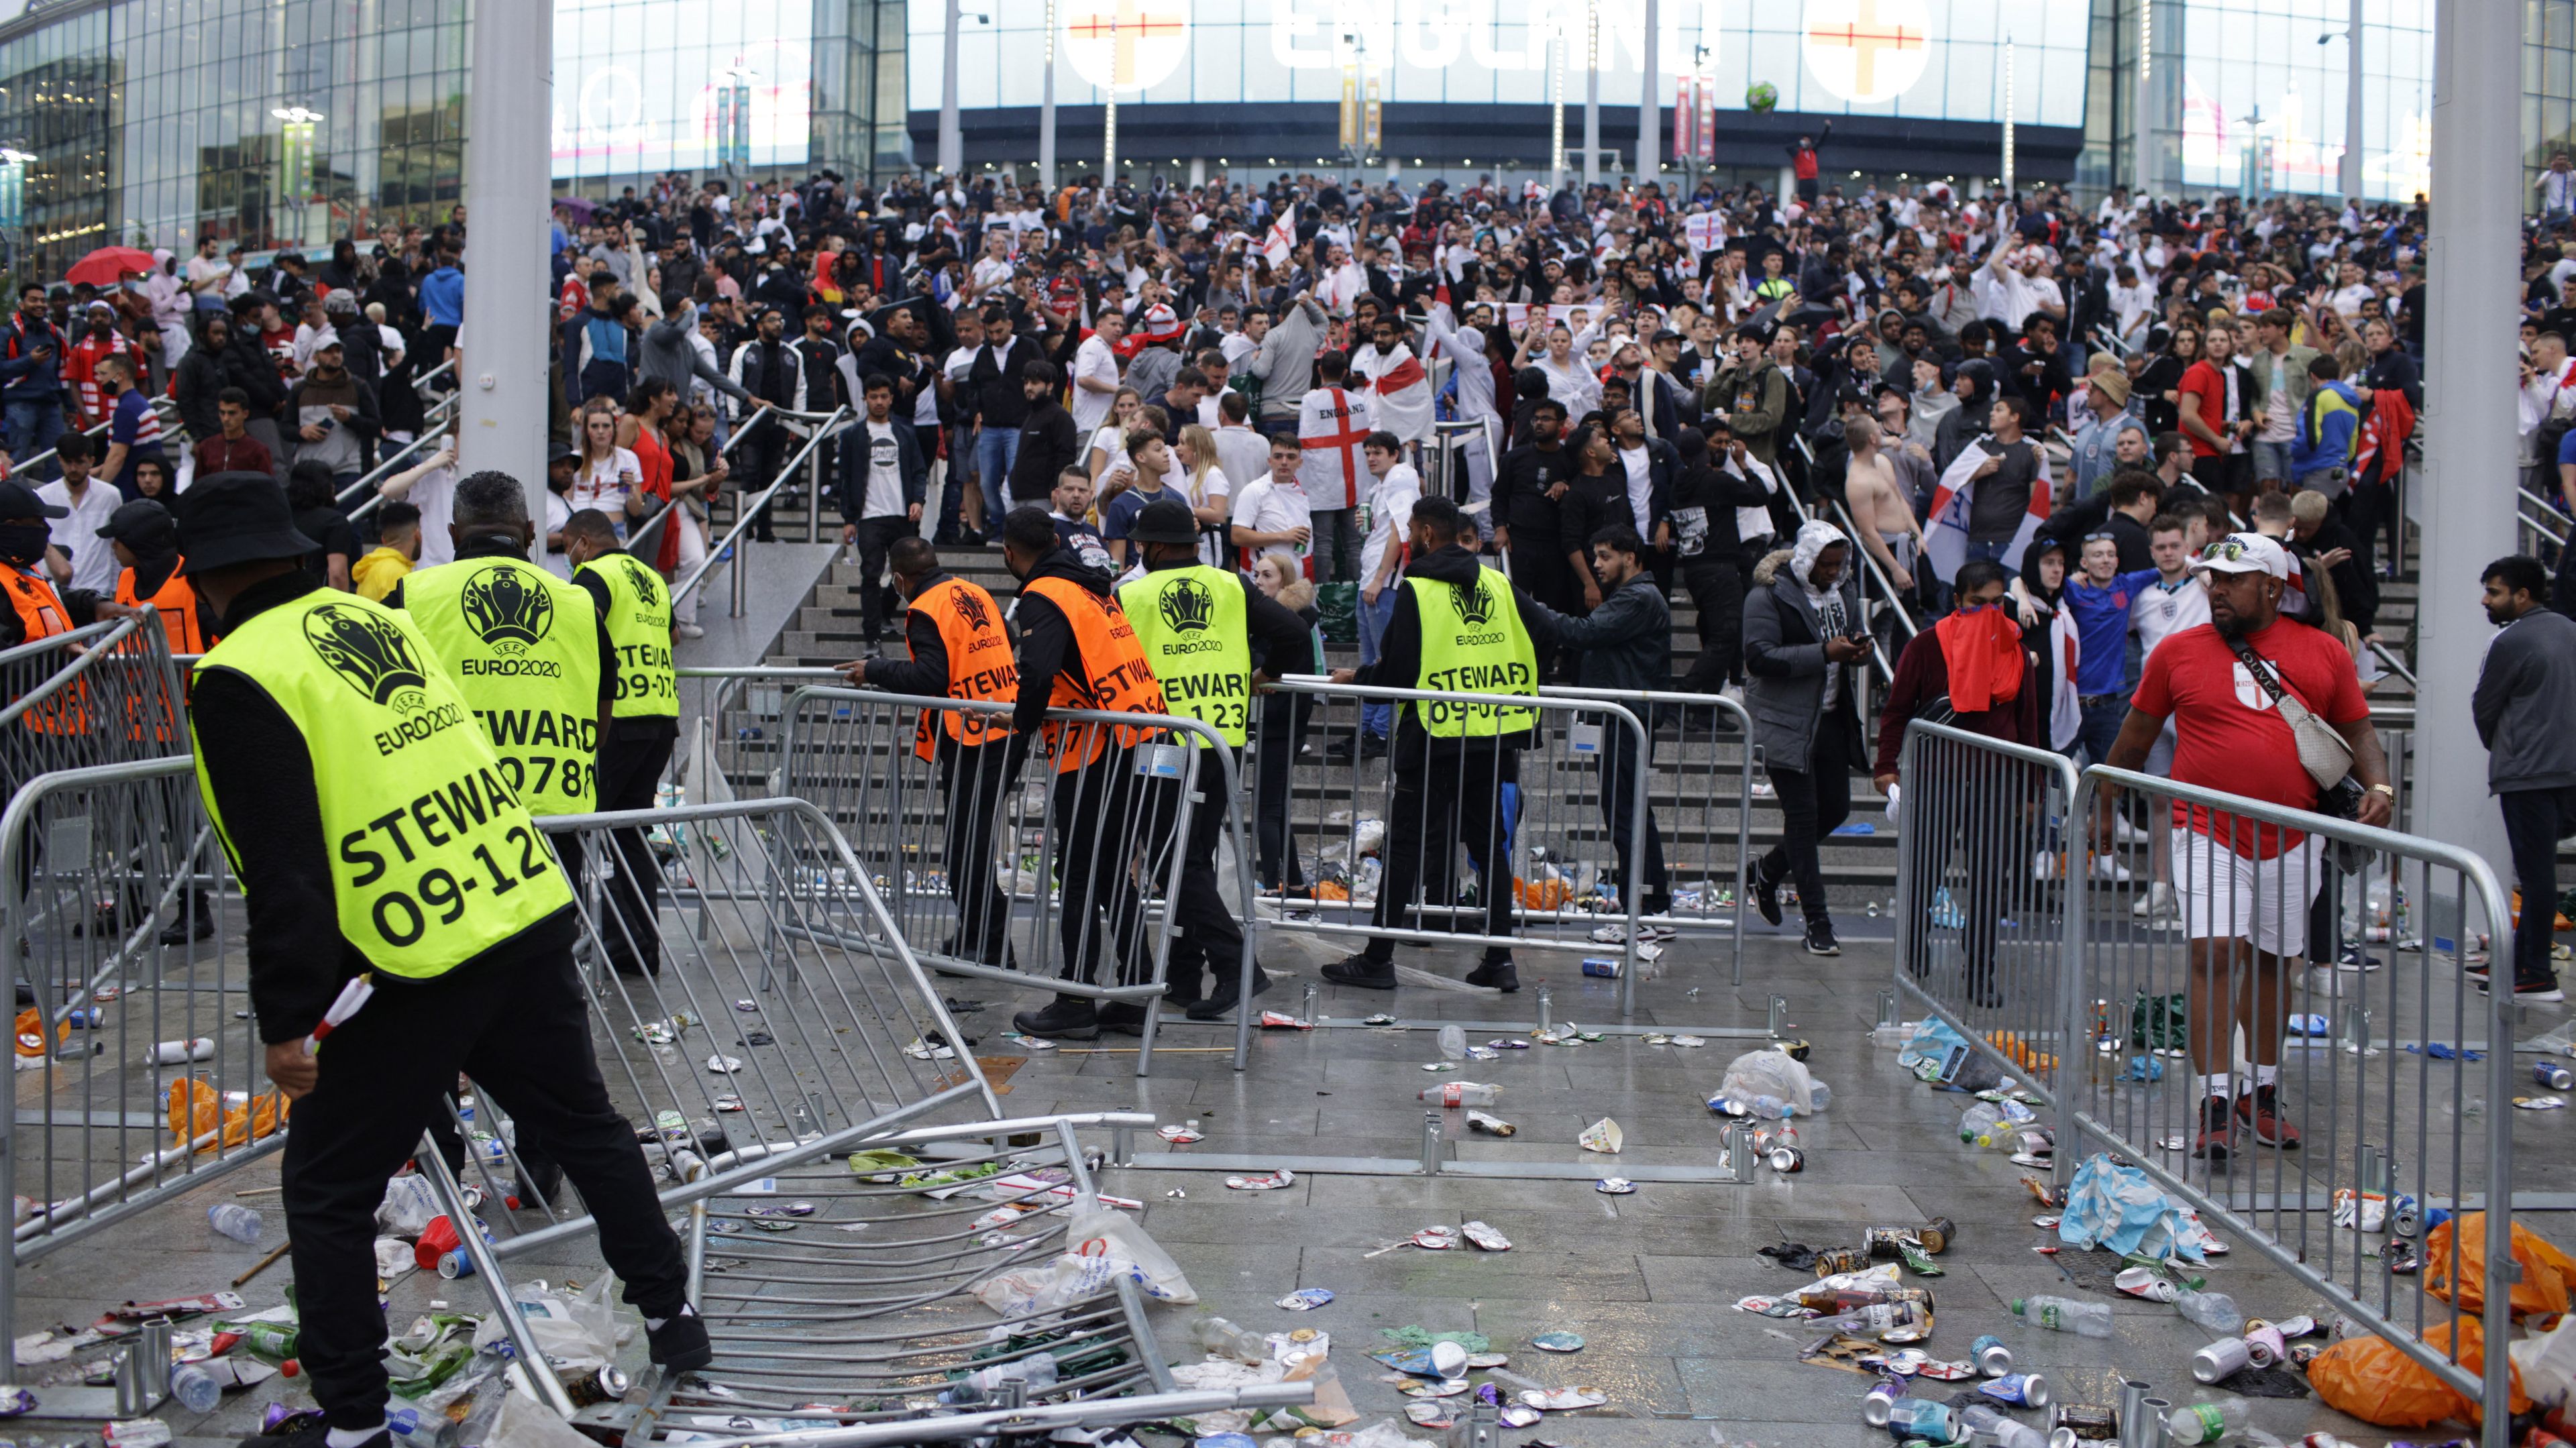 Hundreds of ticketless fans got into Wembley and fought with stewards after areas around the stadium became packed hours before the Euro 2020 final kicked off.